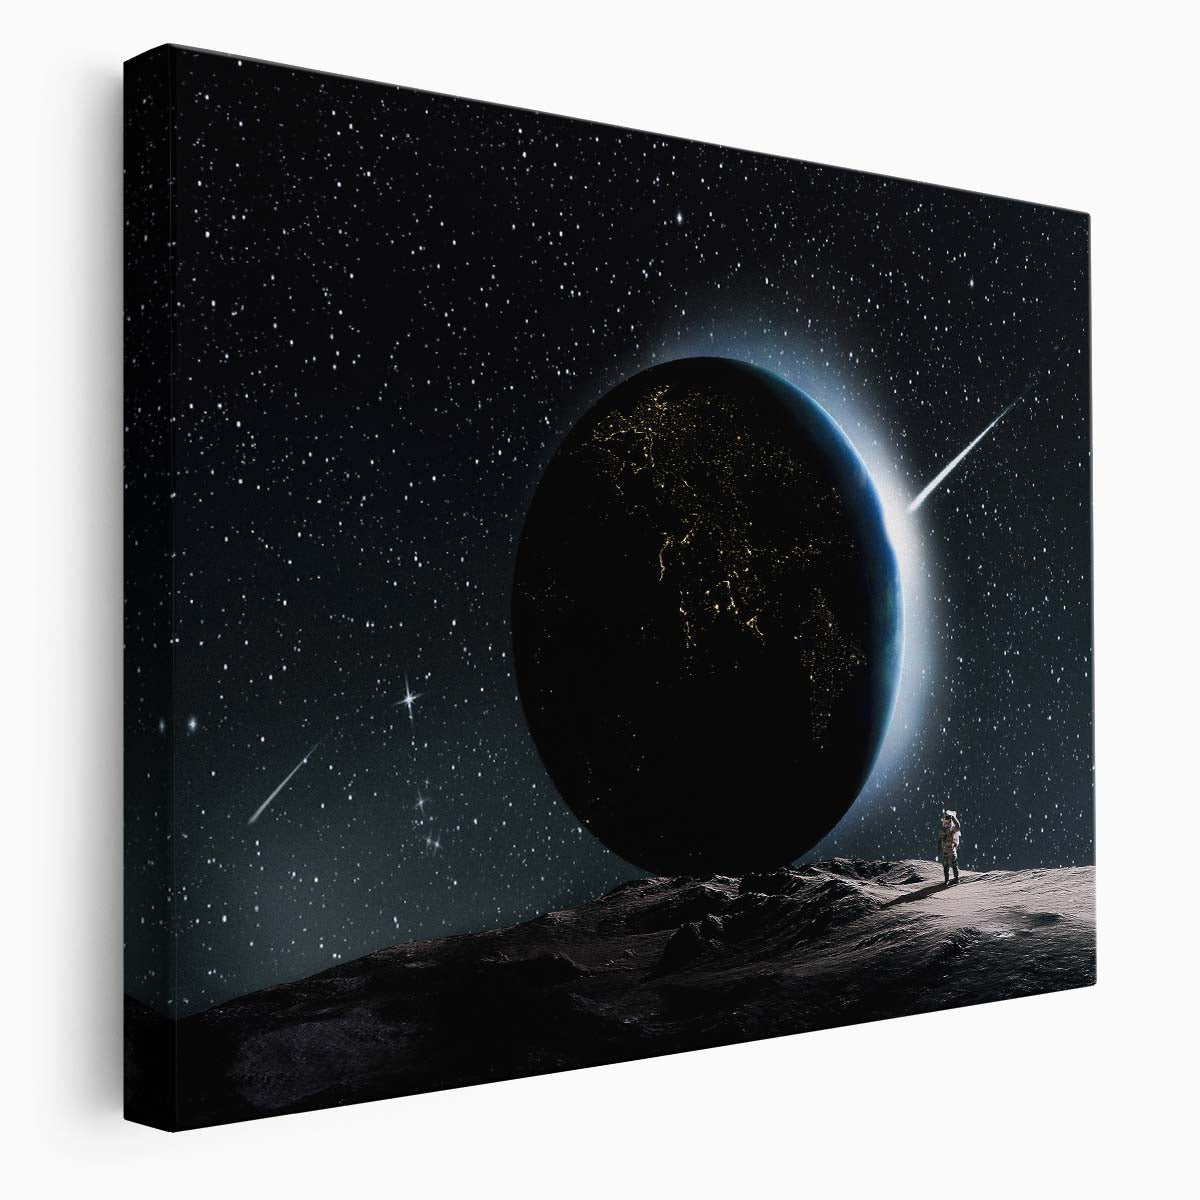 Galactic Dreams Astronaut & Earth Night Sky Wall Art by Luxuriance Designs. Made in USA.